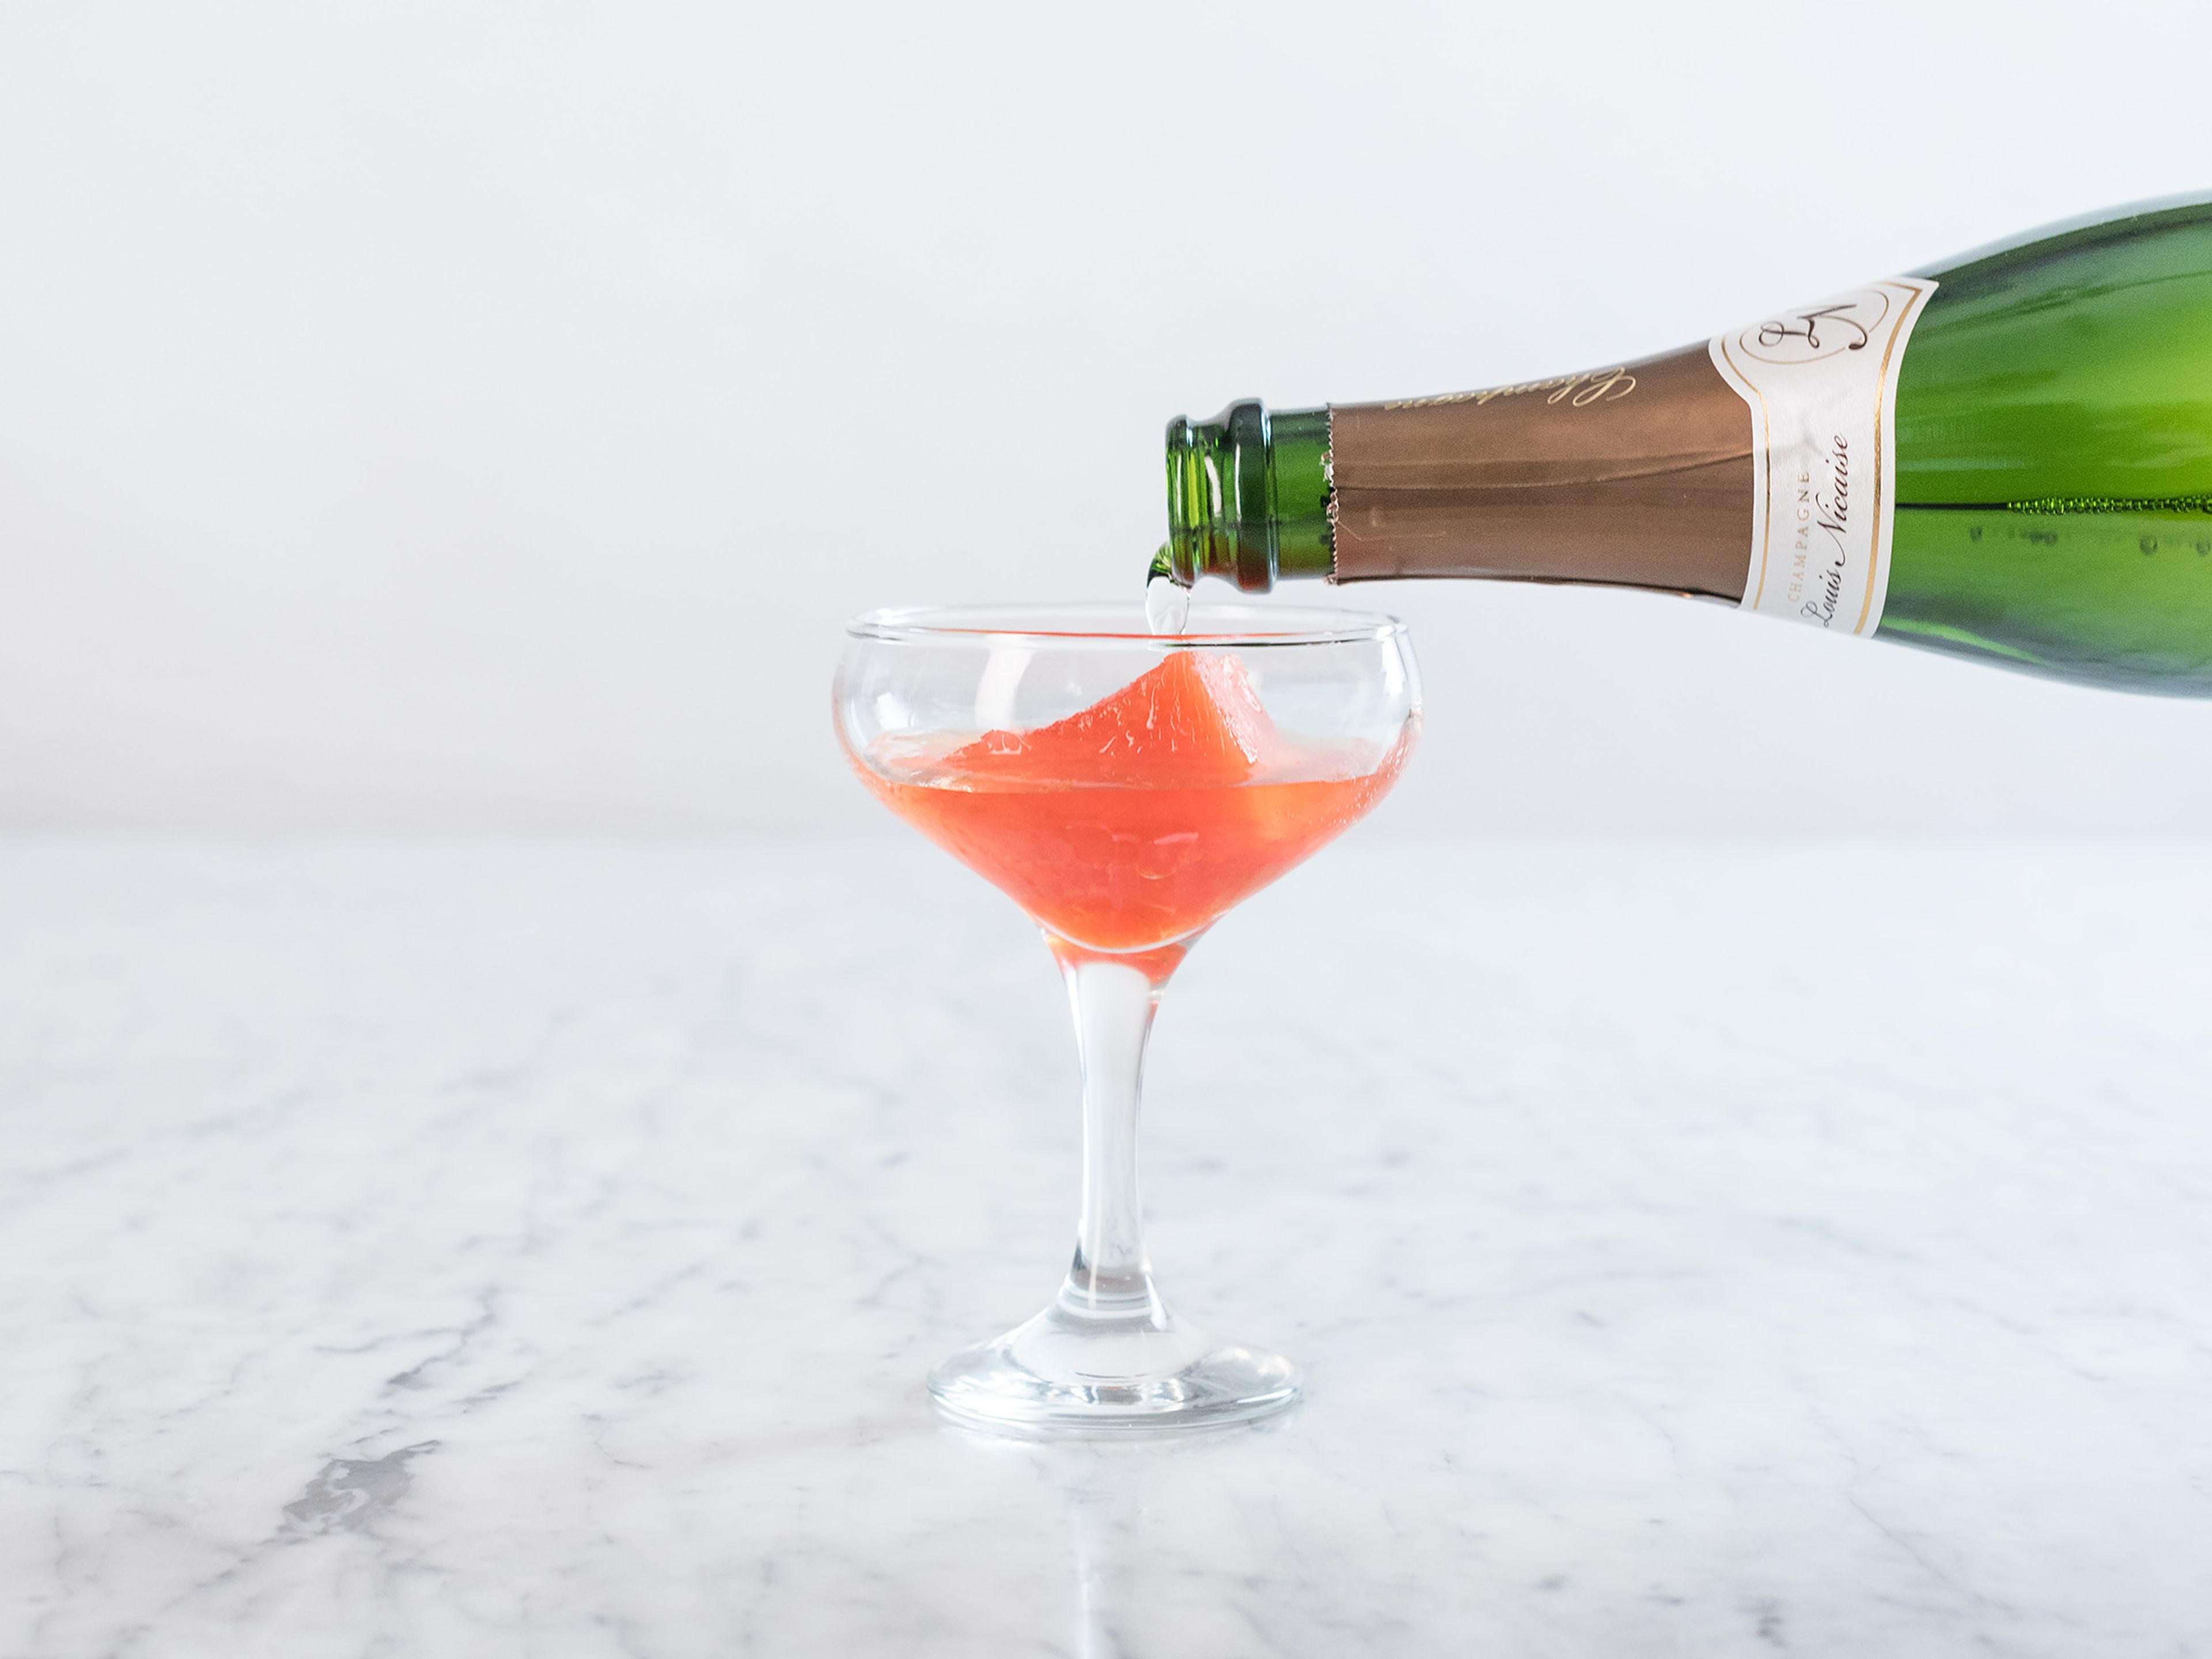 Add 1 Aperol ice cube to each glass, top with Prosecco, and garnish with orange wedges. Enjoy!